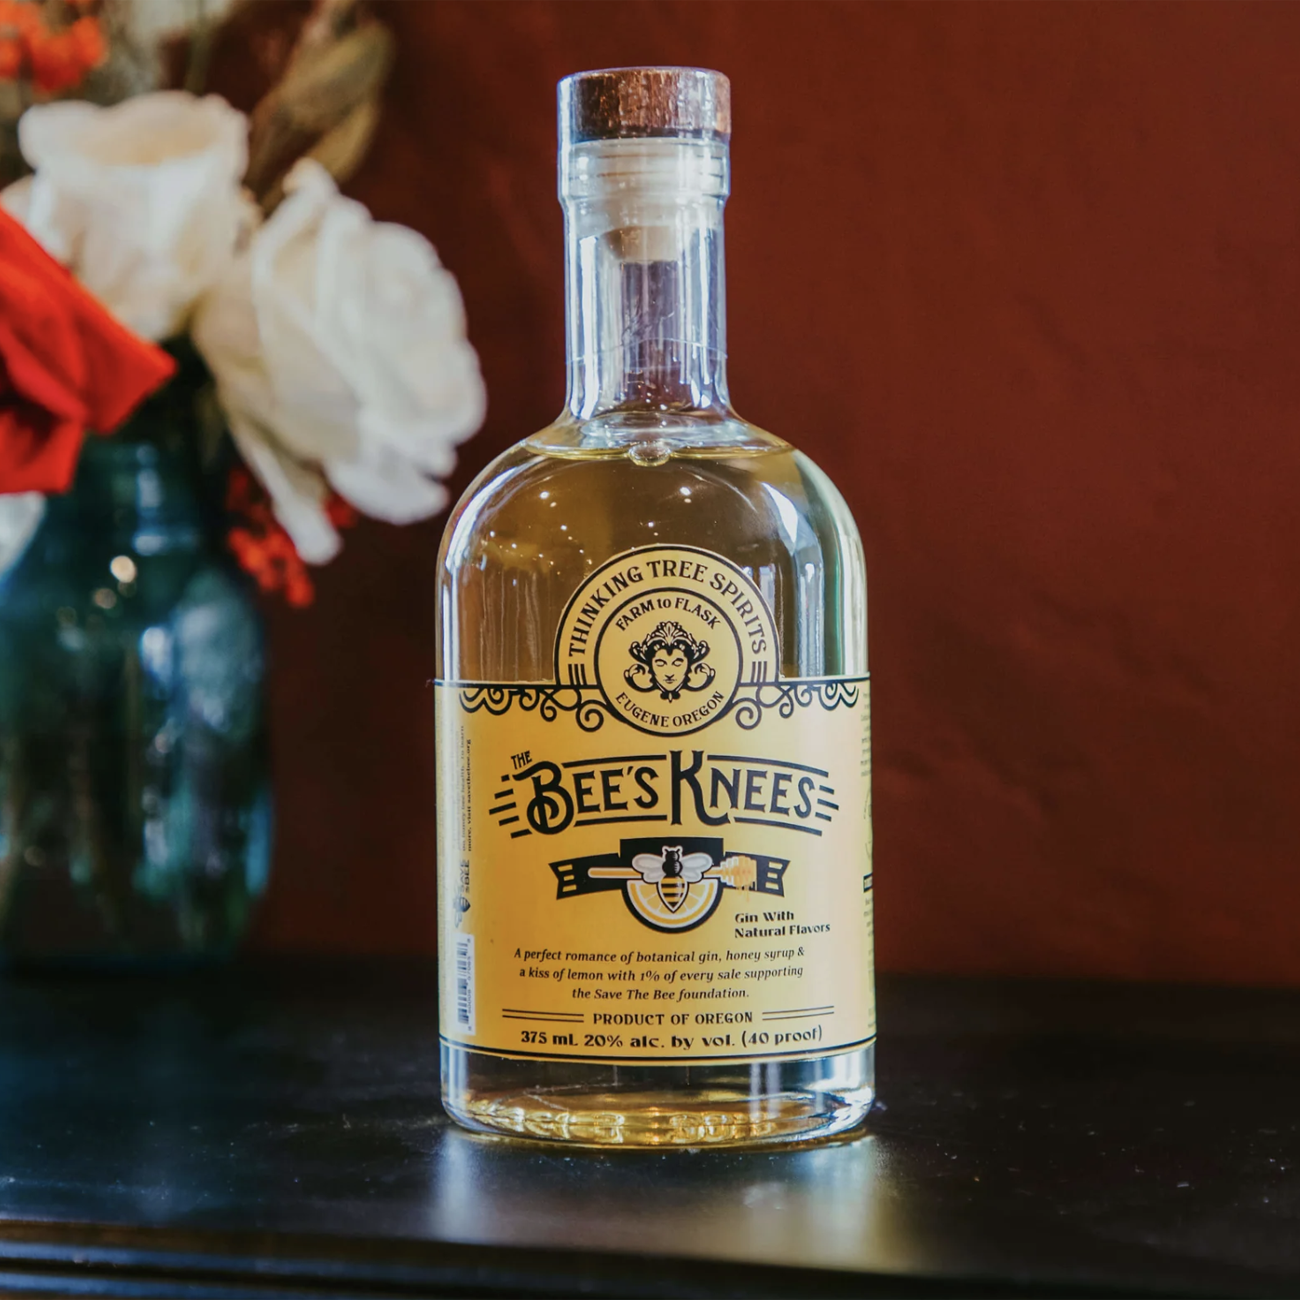 Bees Knees cocktail from an Oregon distiller